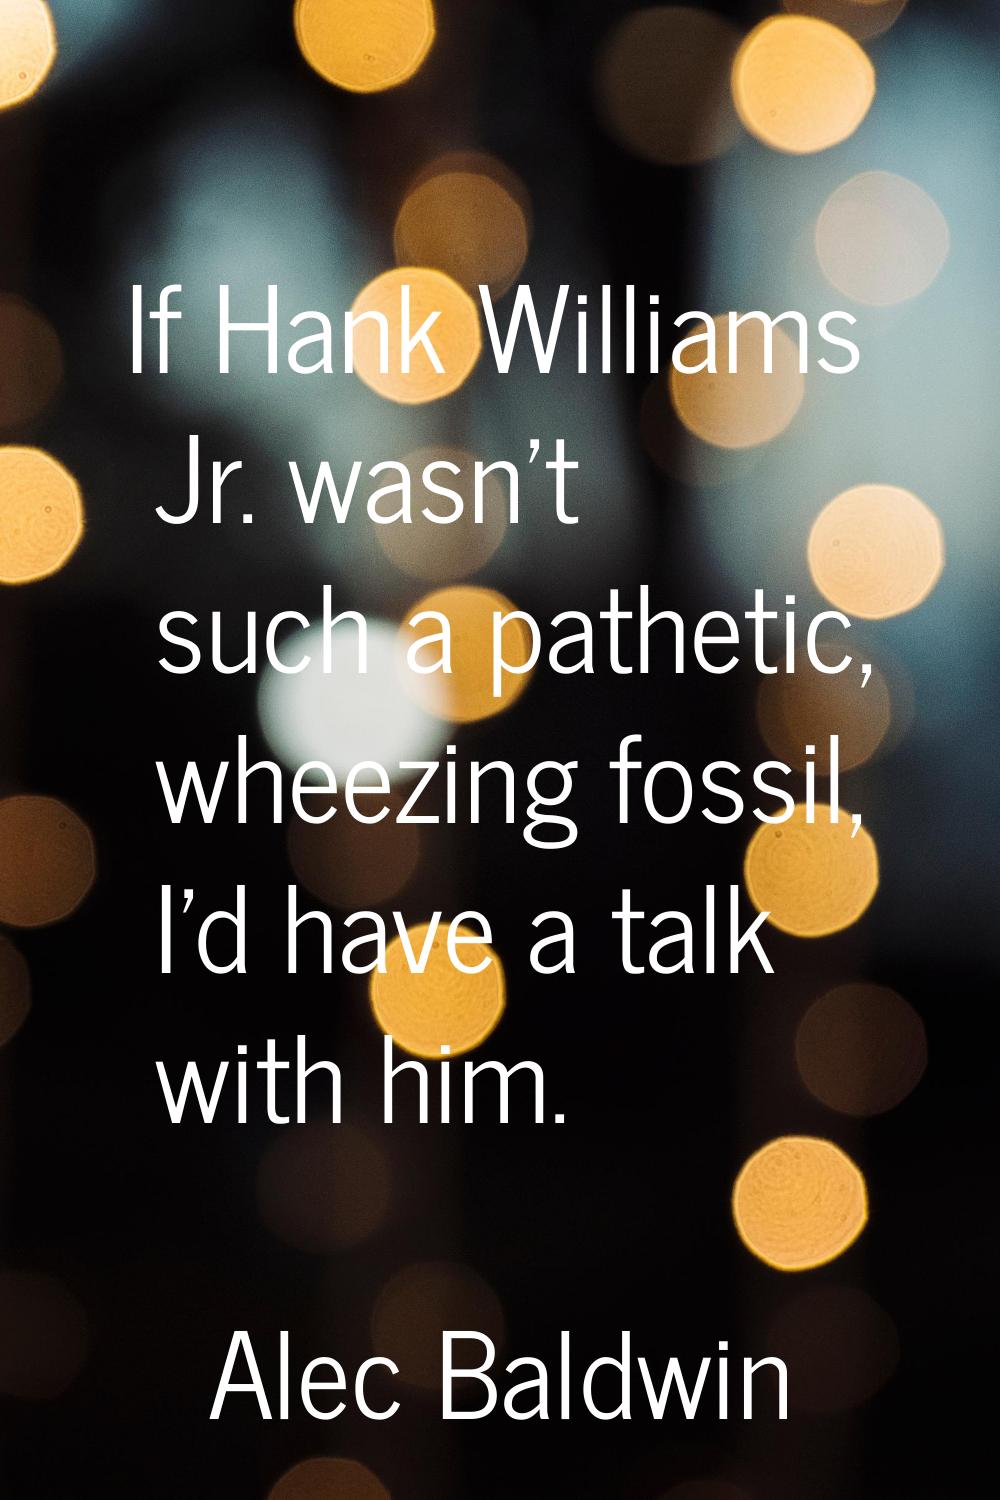 If Hank Williams Jr. wasn't such a pathetic, wheezing fossil, I'd have a talk with him.